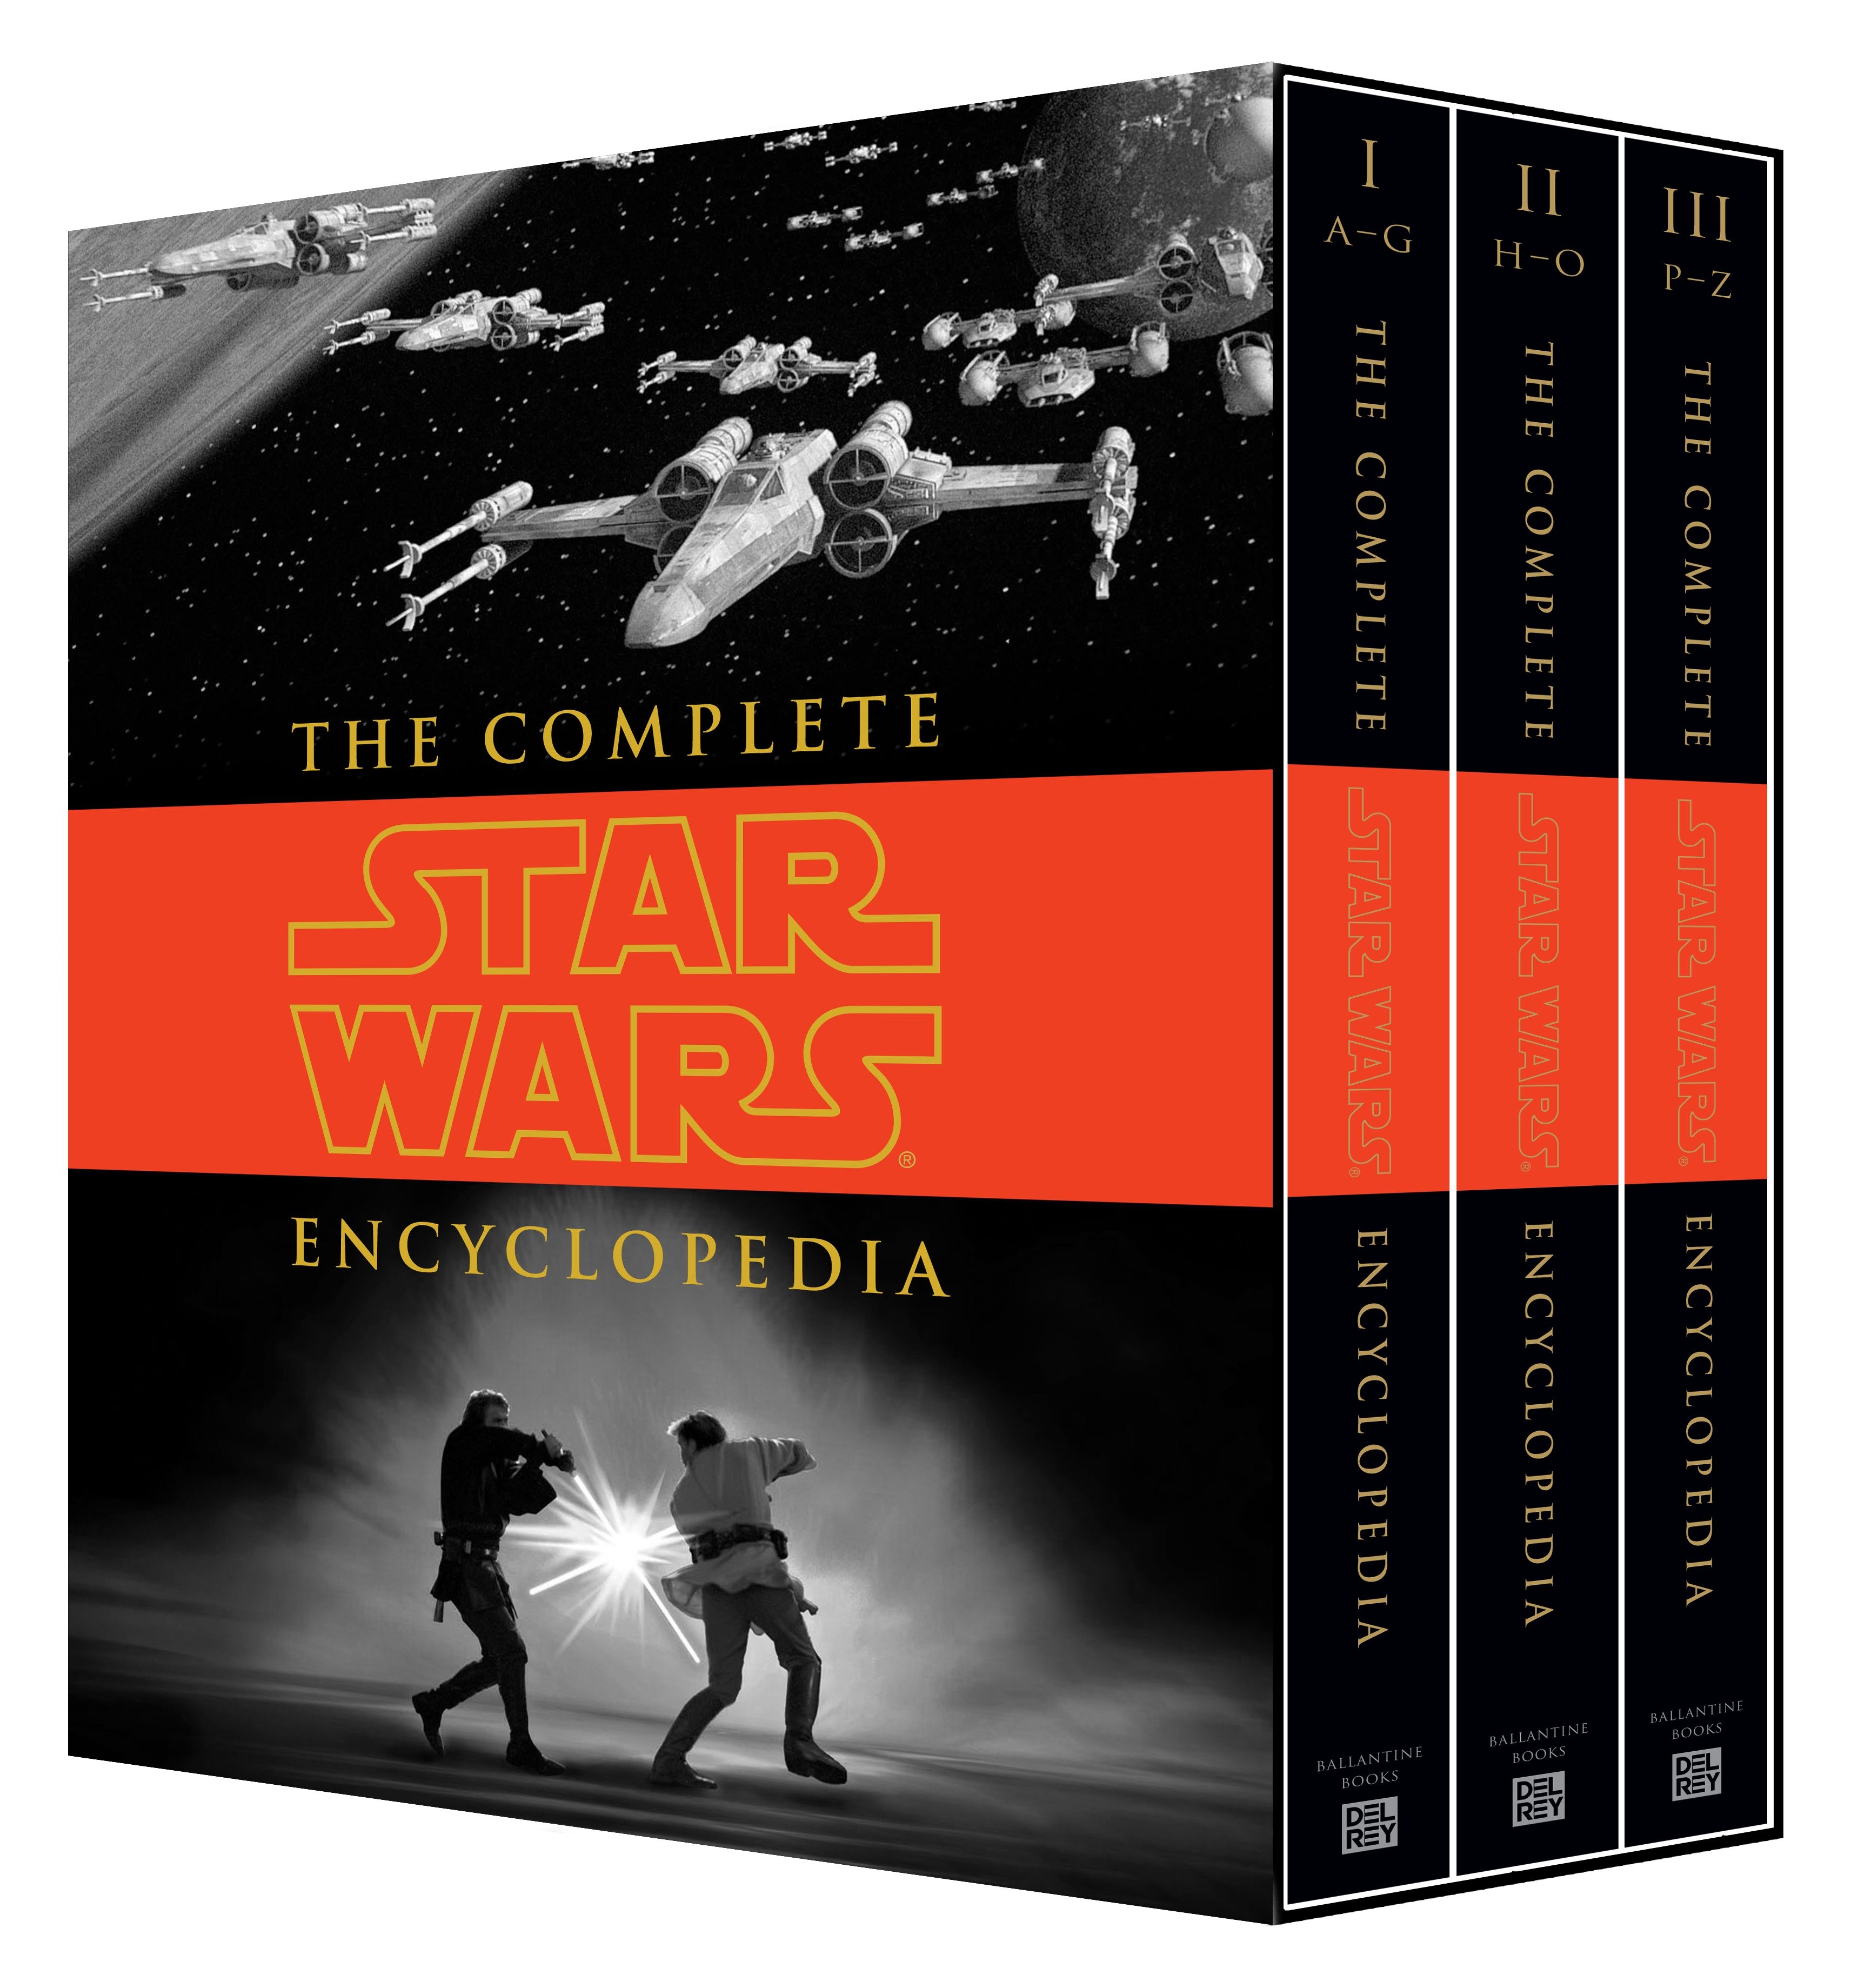 The Complete Star Wars Encyclopedia Hardcover